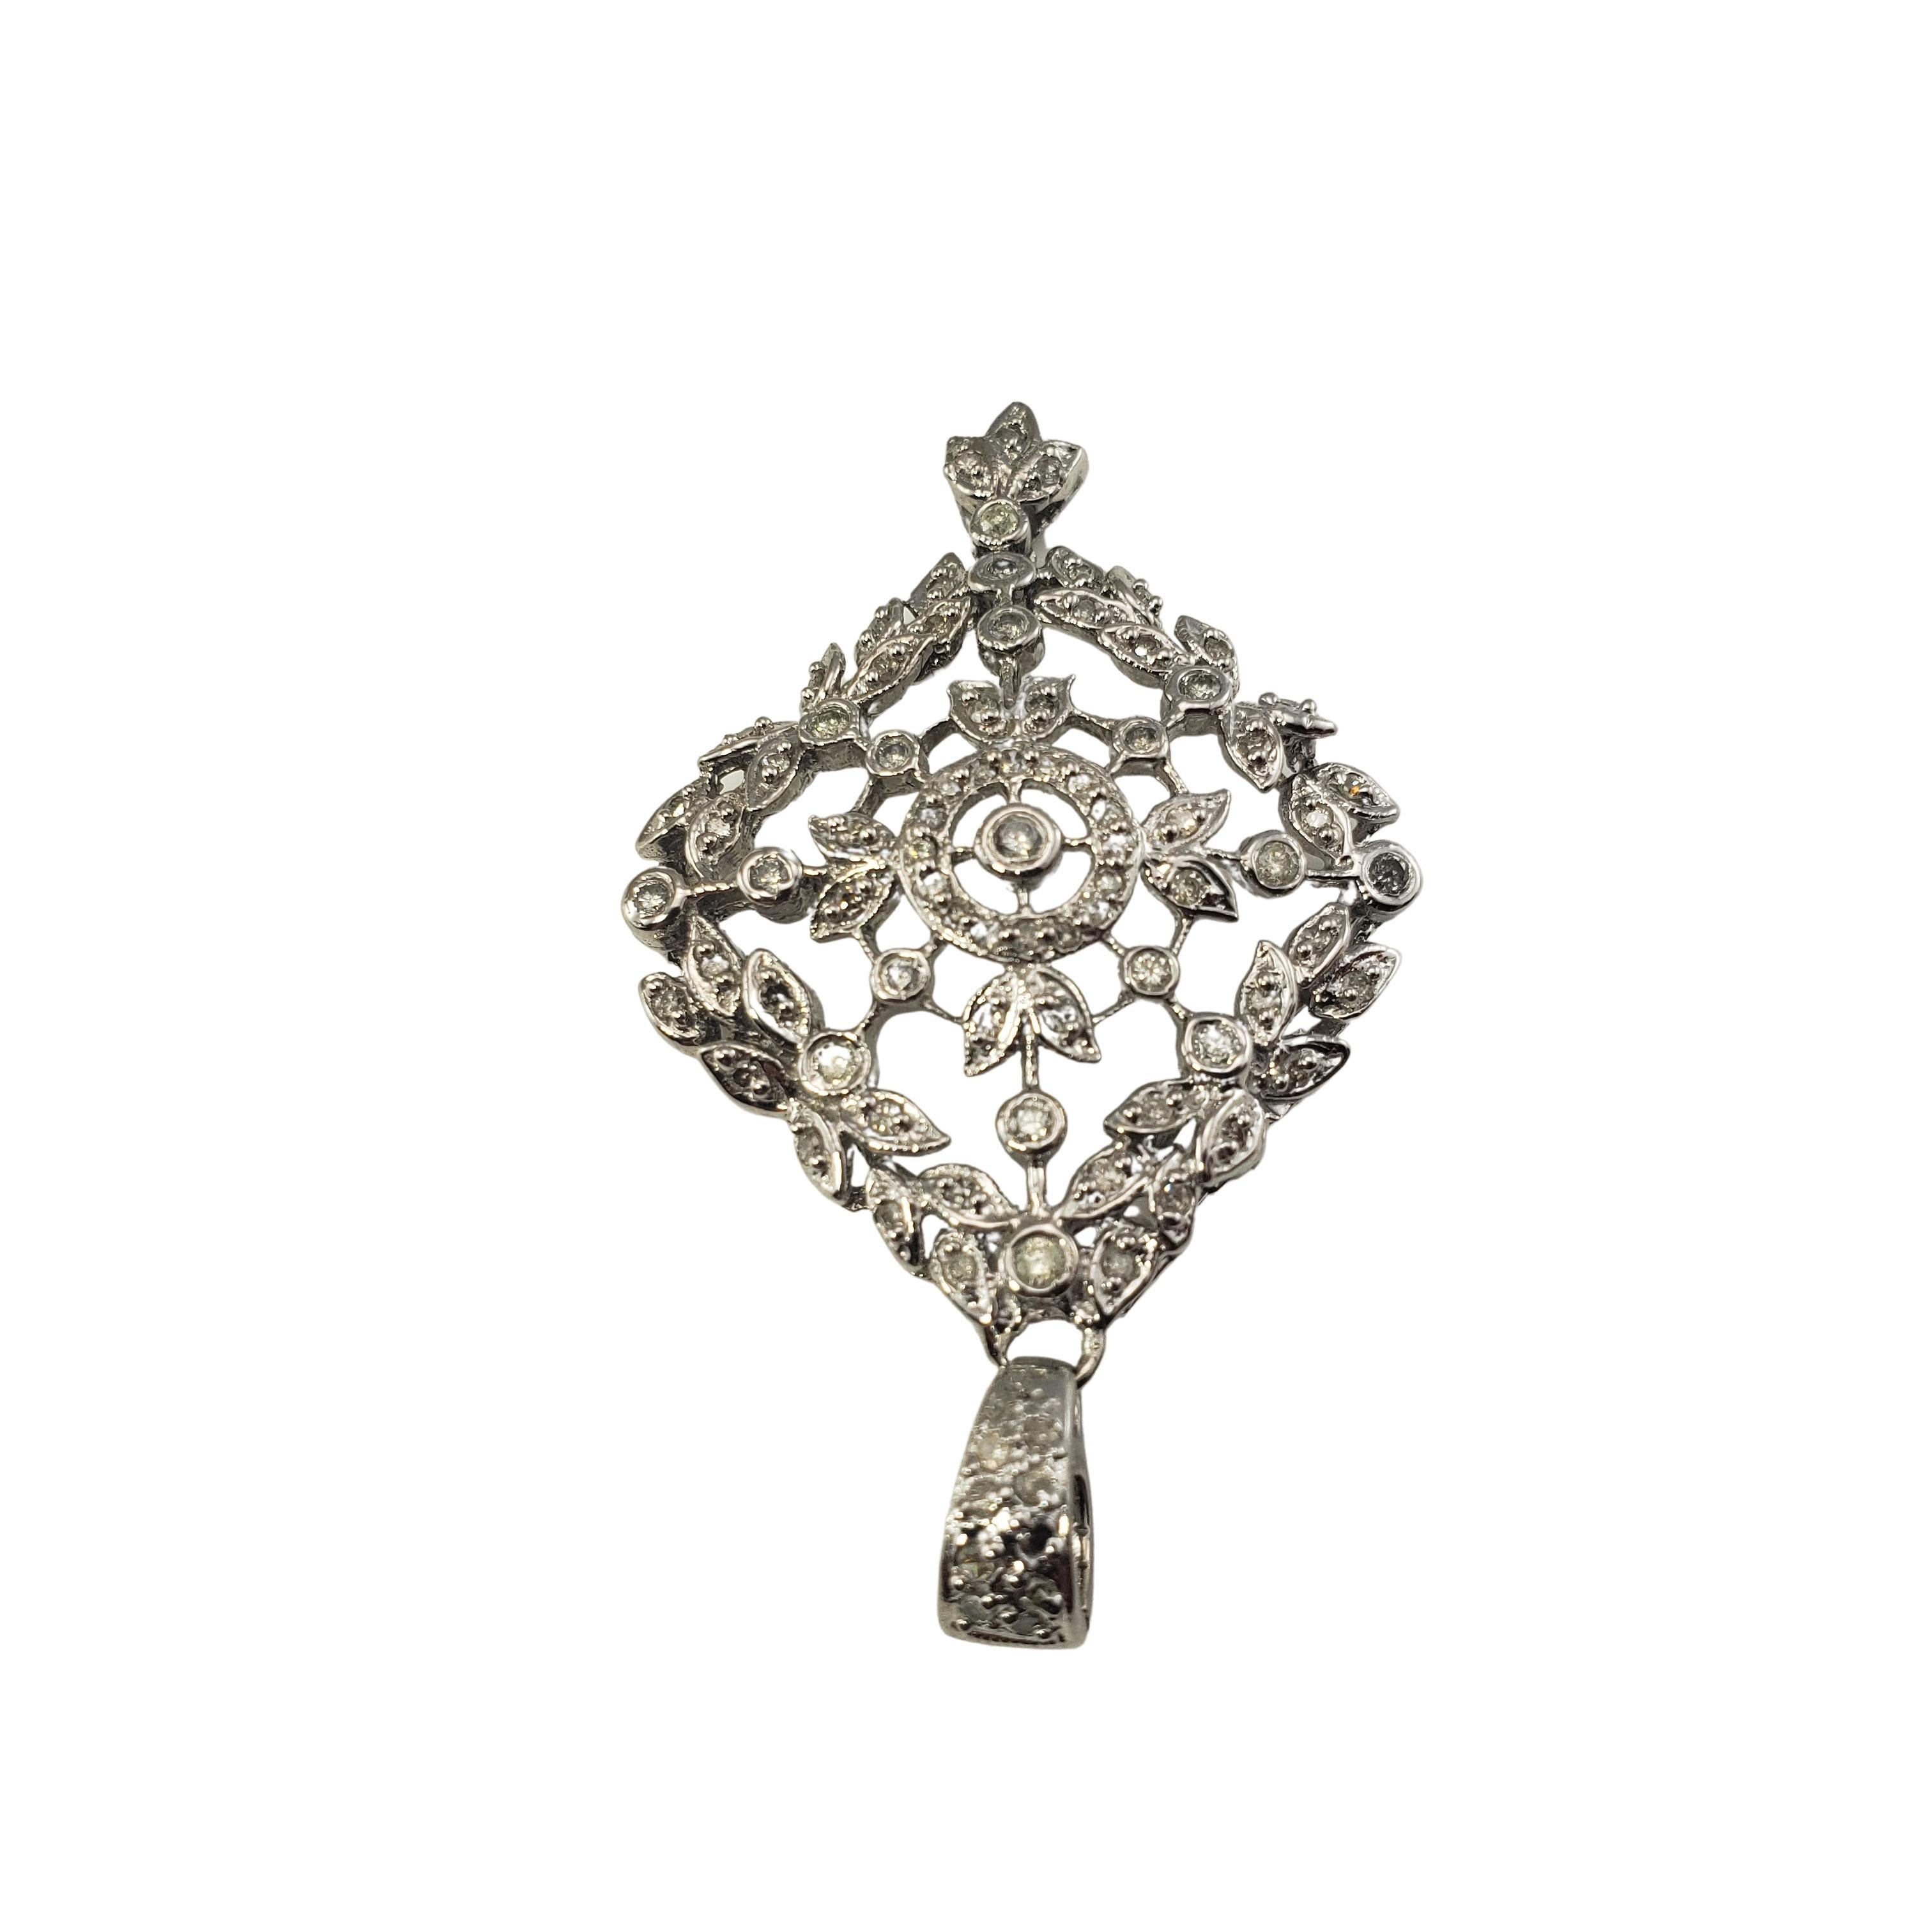 Vintage 10 Karat White Gold and Diamond Floral Pendant-

This sparkling pendant features 93 round brilliant cut diamonds set in classic 10K white gold.

Approximate total diamond weight:  .75 ct.

Diamond color: H-K

Diamond clarity: I1-I3

Size: 46